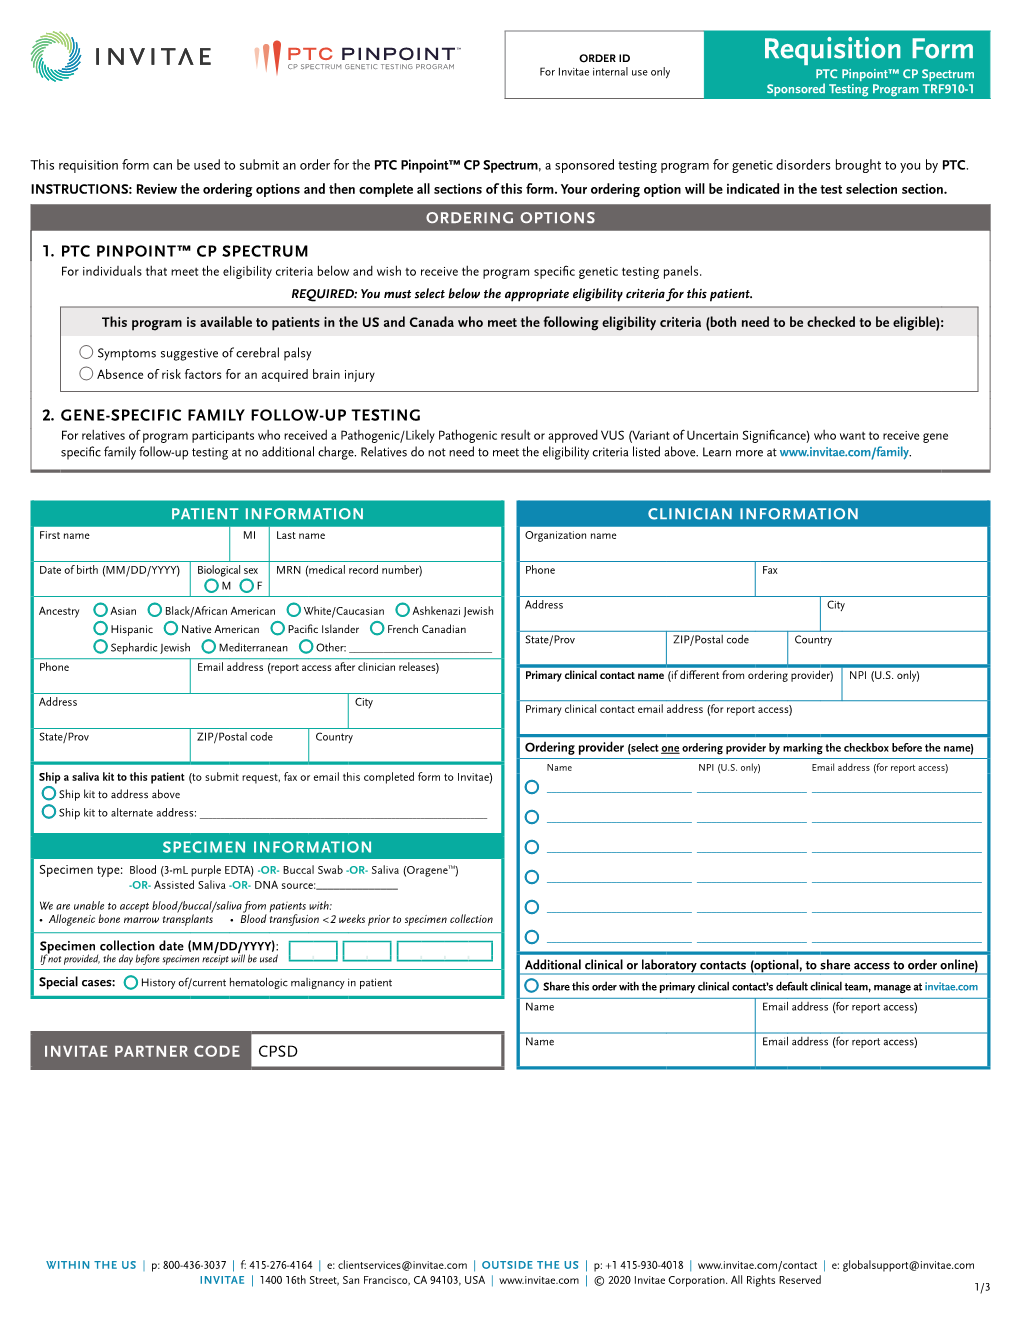 Requisition Form for Invitae Internal Use Only PTC Pinpoint™ CP Spectrum Sponsored Testing Program TRF910-1